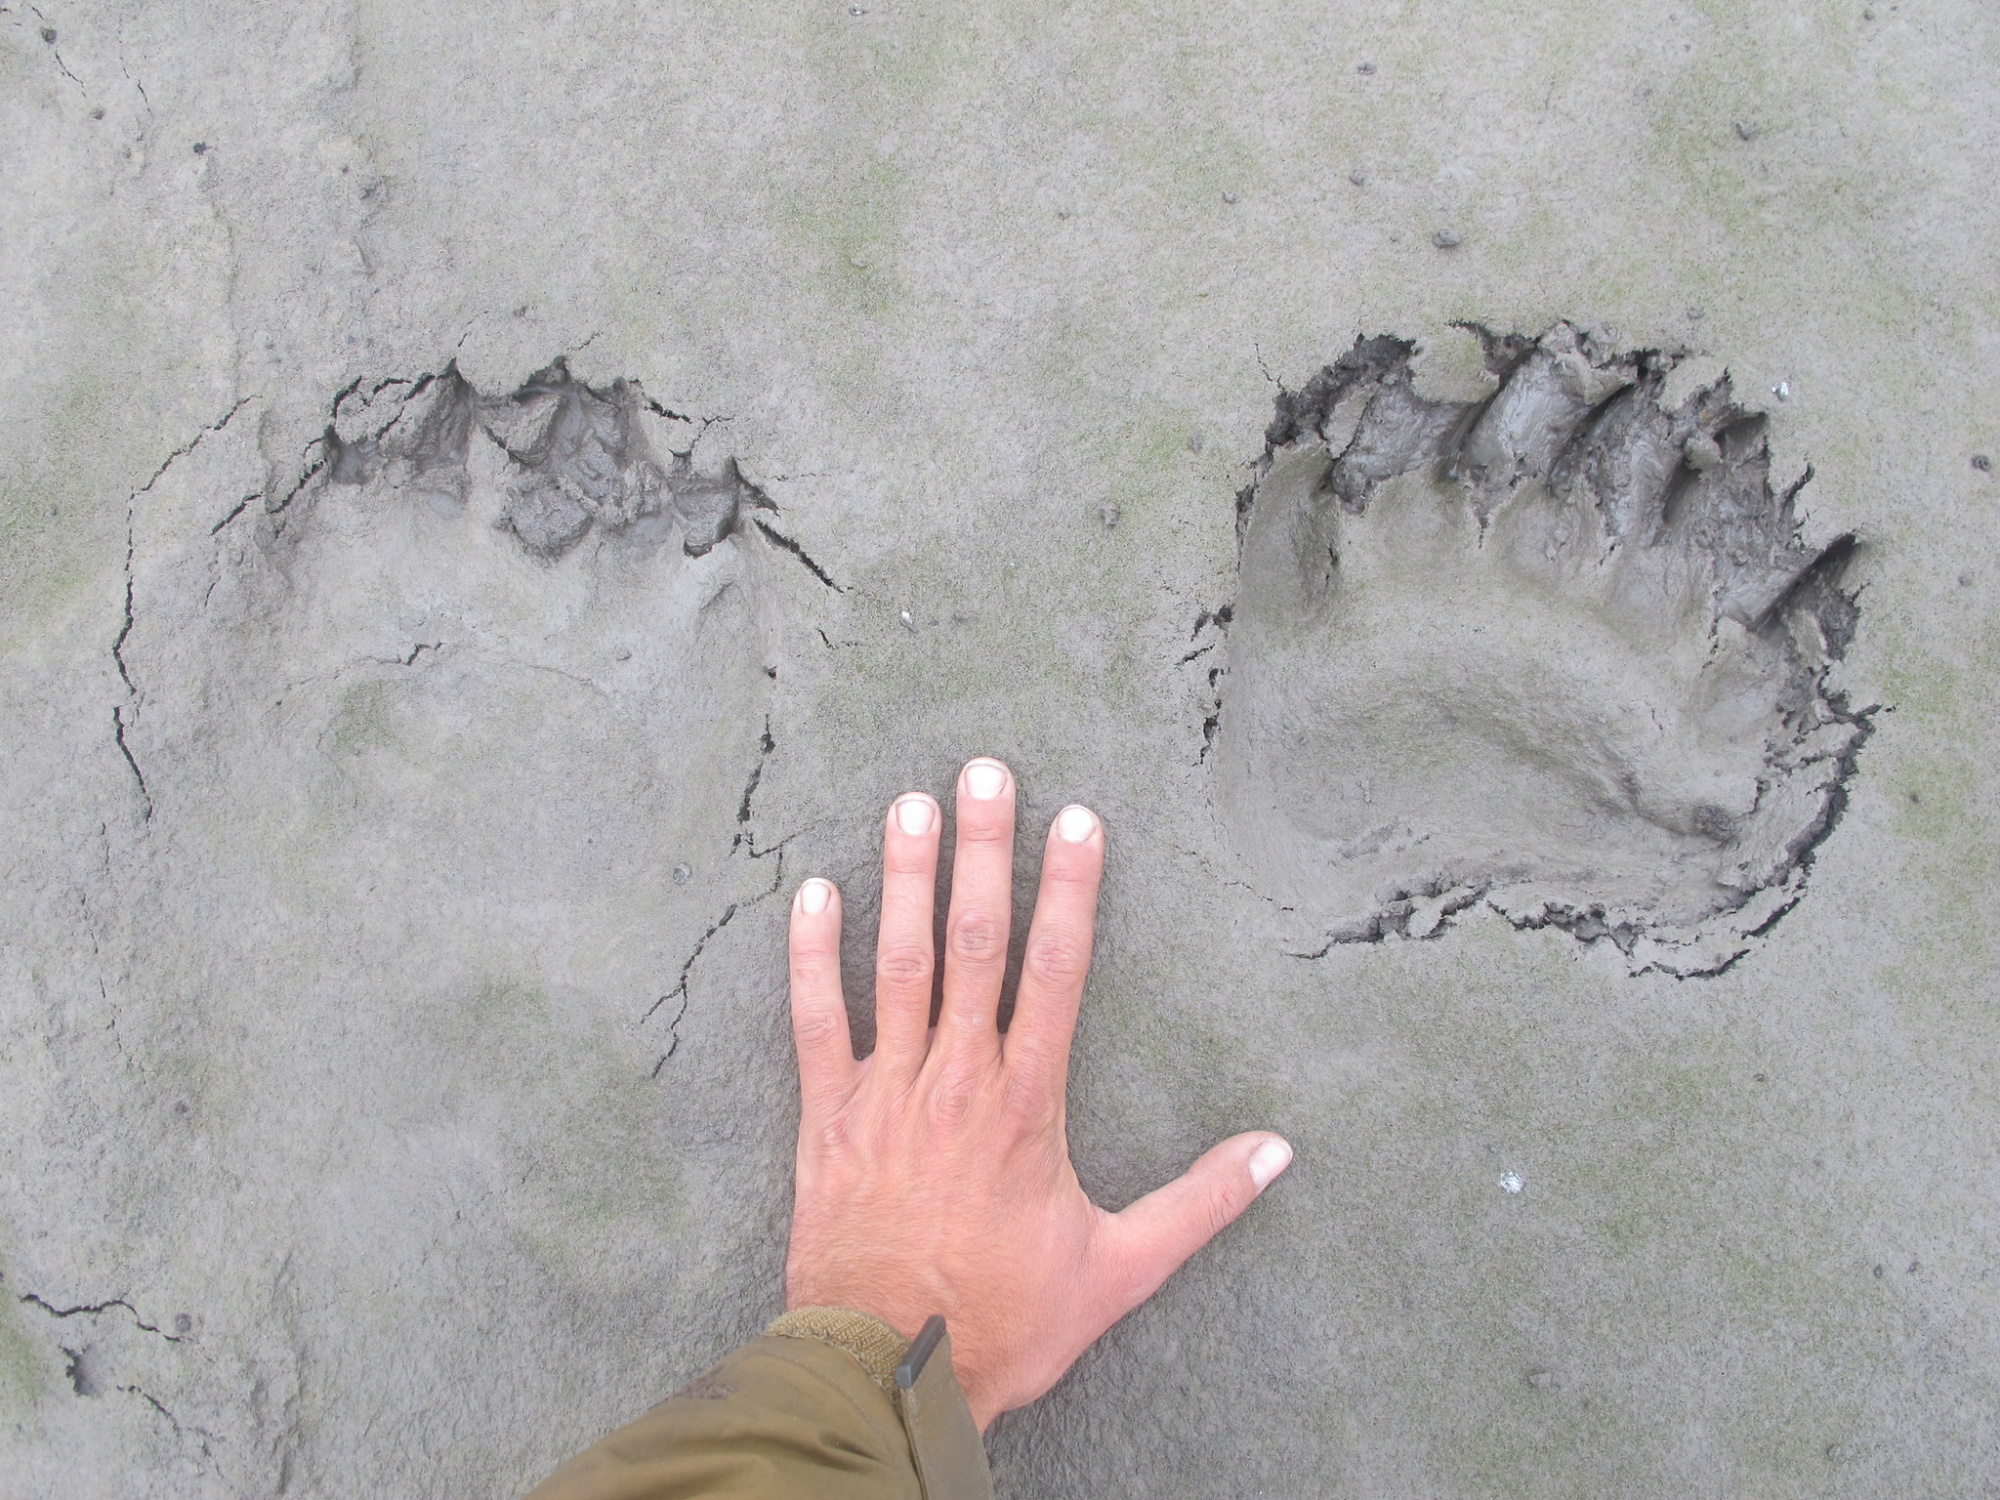 Two polar bear tracks are much larger than the hand next to them.